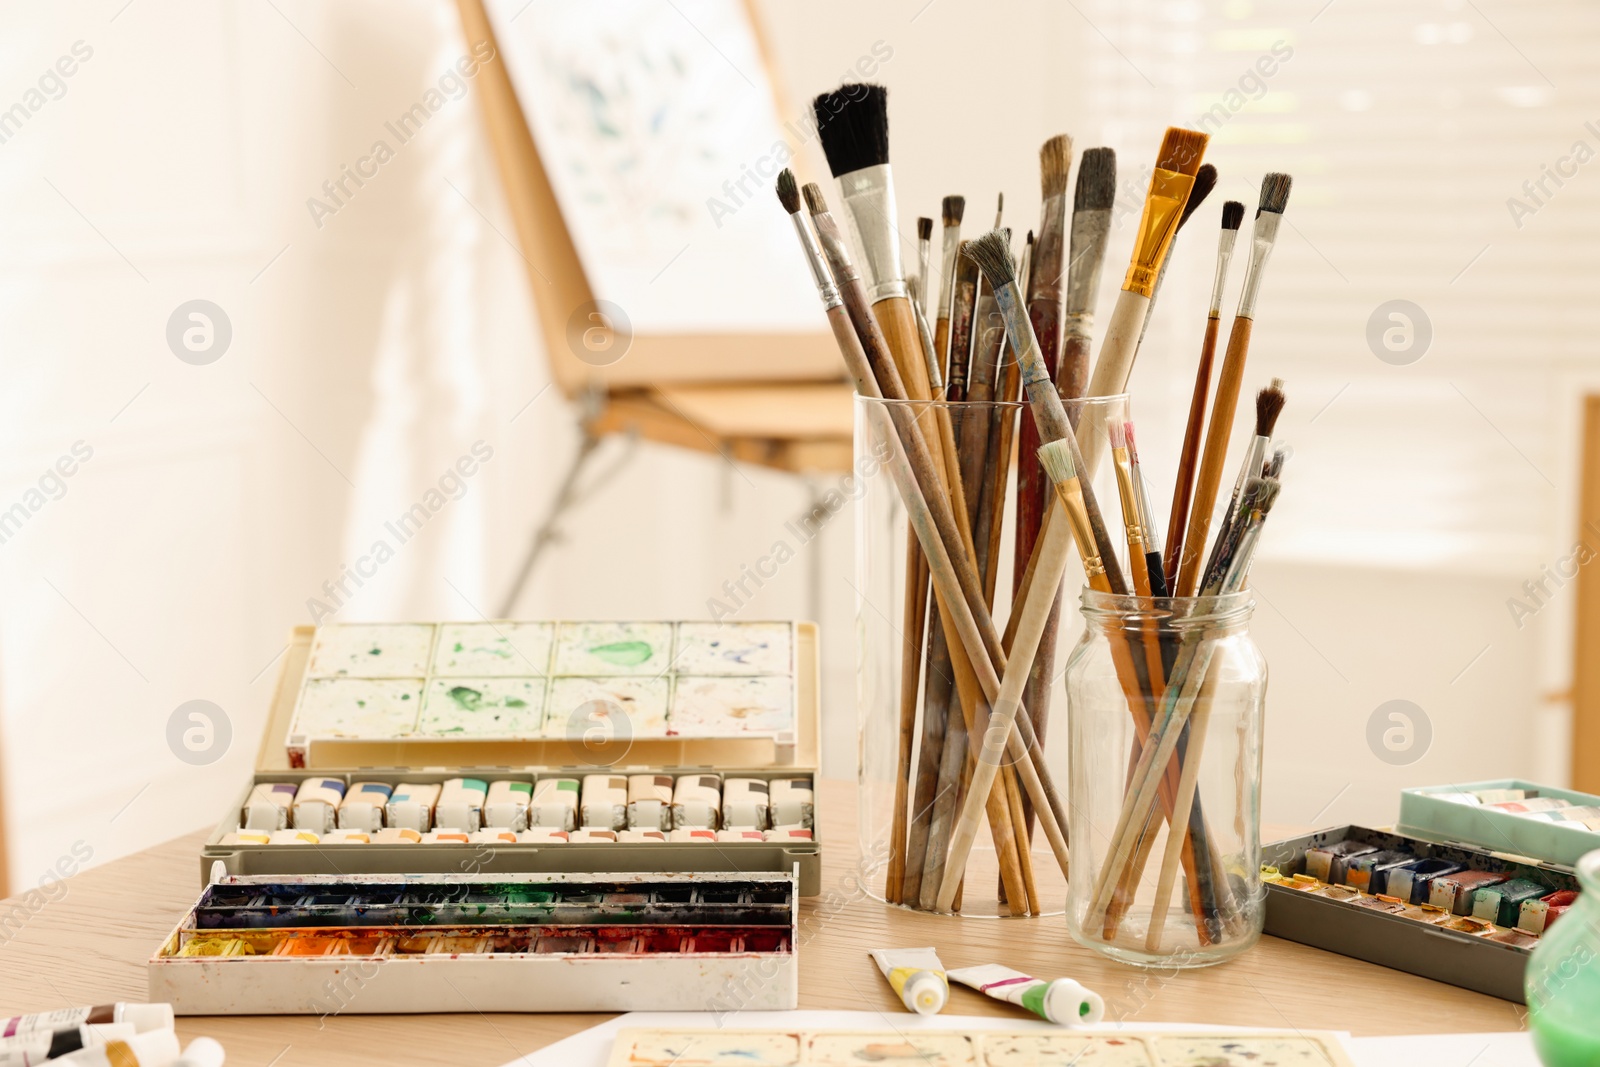 Photo of Different brushes and paints on wooden table in studio. Artist's workplace